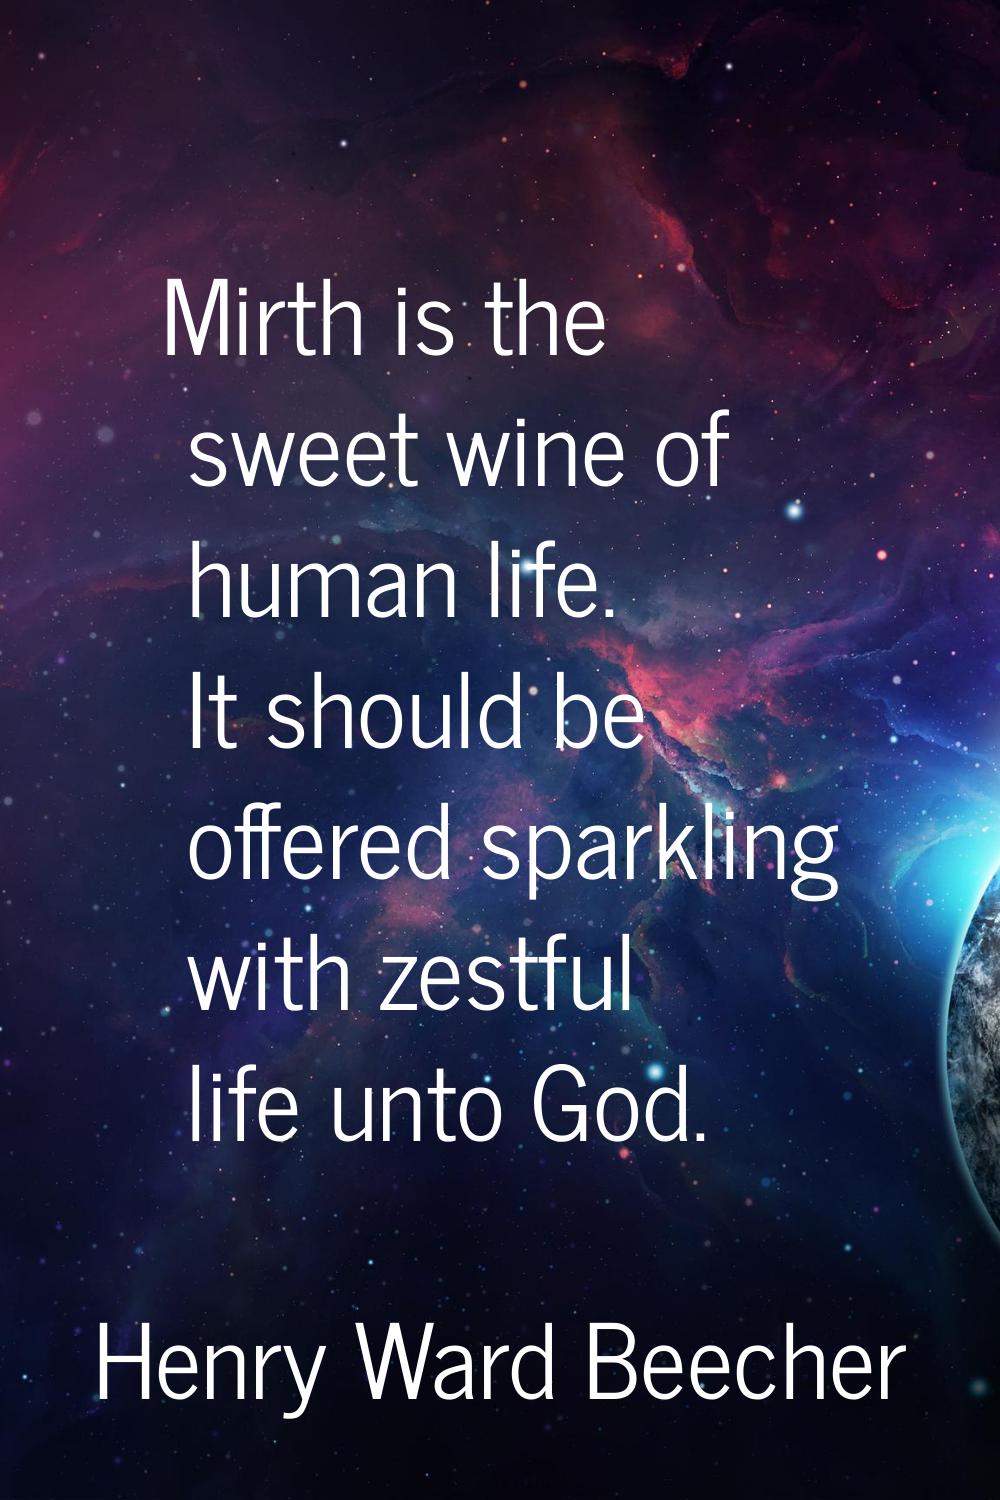 Mirth is the sweet wine of human life. It should be offered sparkling with zestful life unto God.